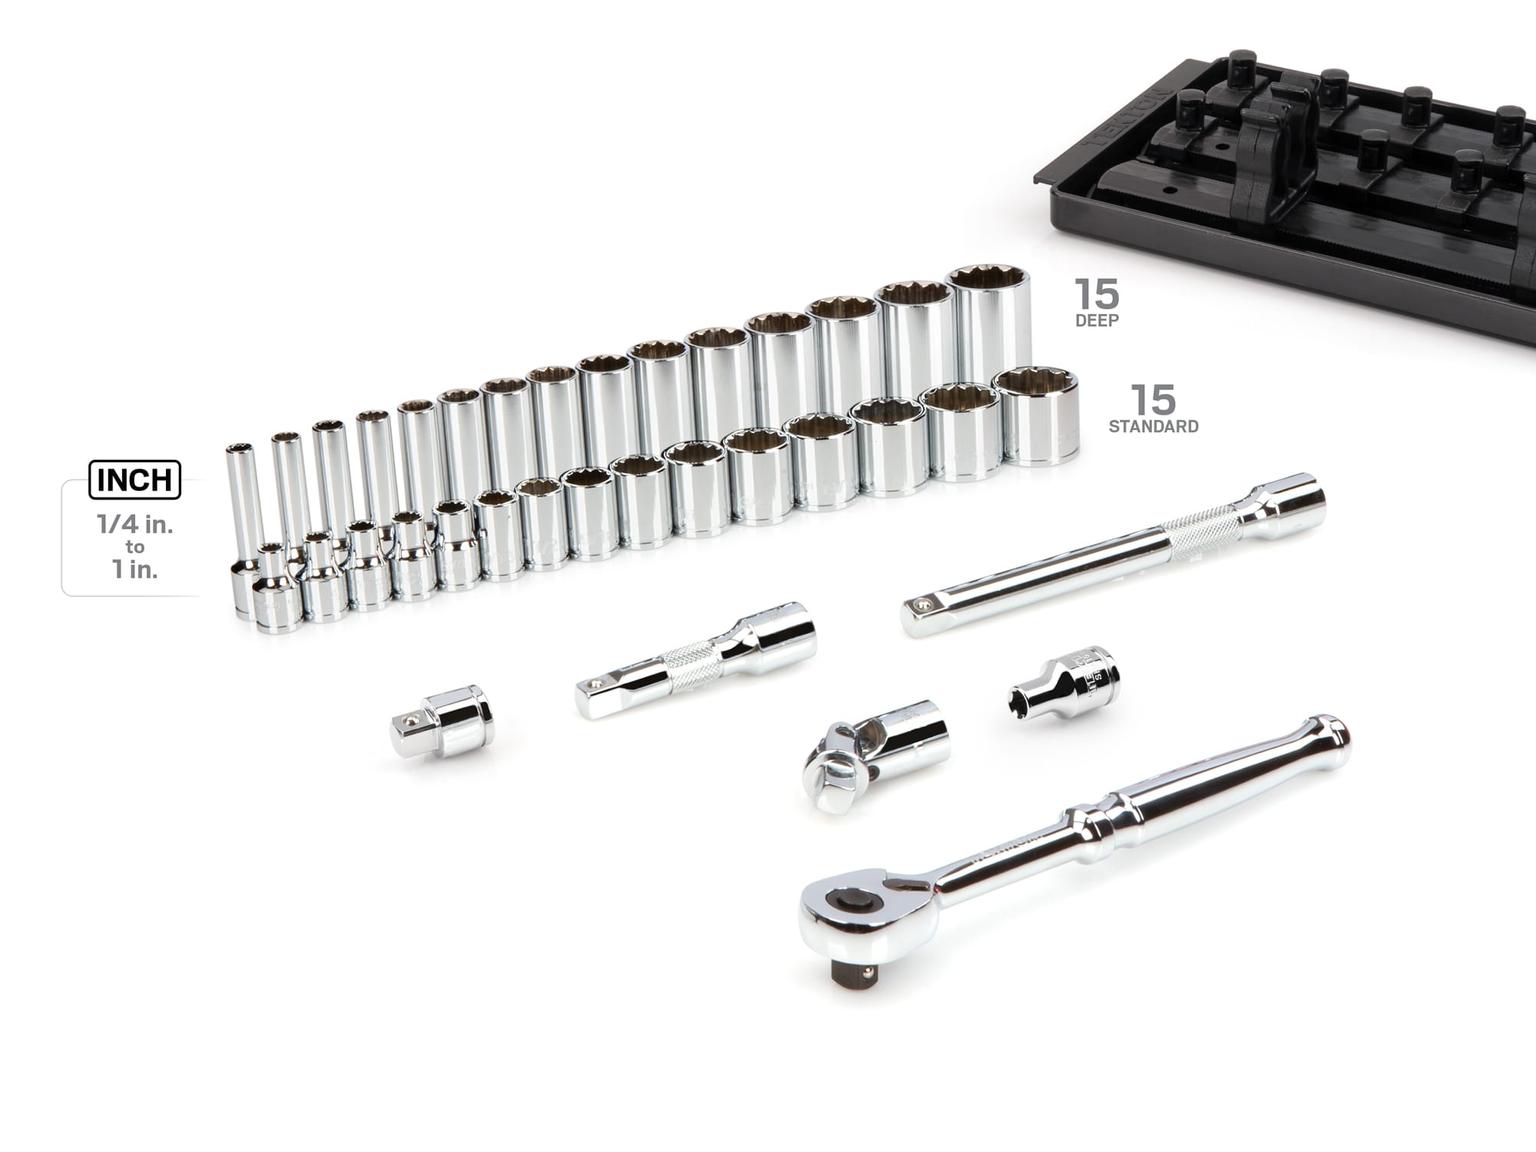 TEKTON SKT13102-T 3/8 Inch Drive 12-Point Socket and Ratchet Set with Rails, 36-Piece (1/4-1 in.)